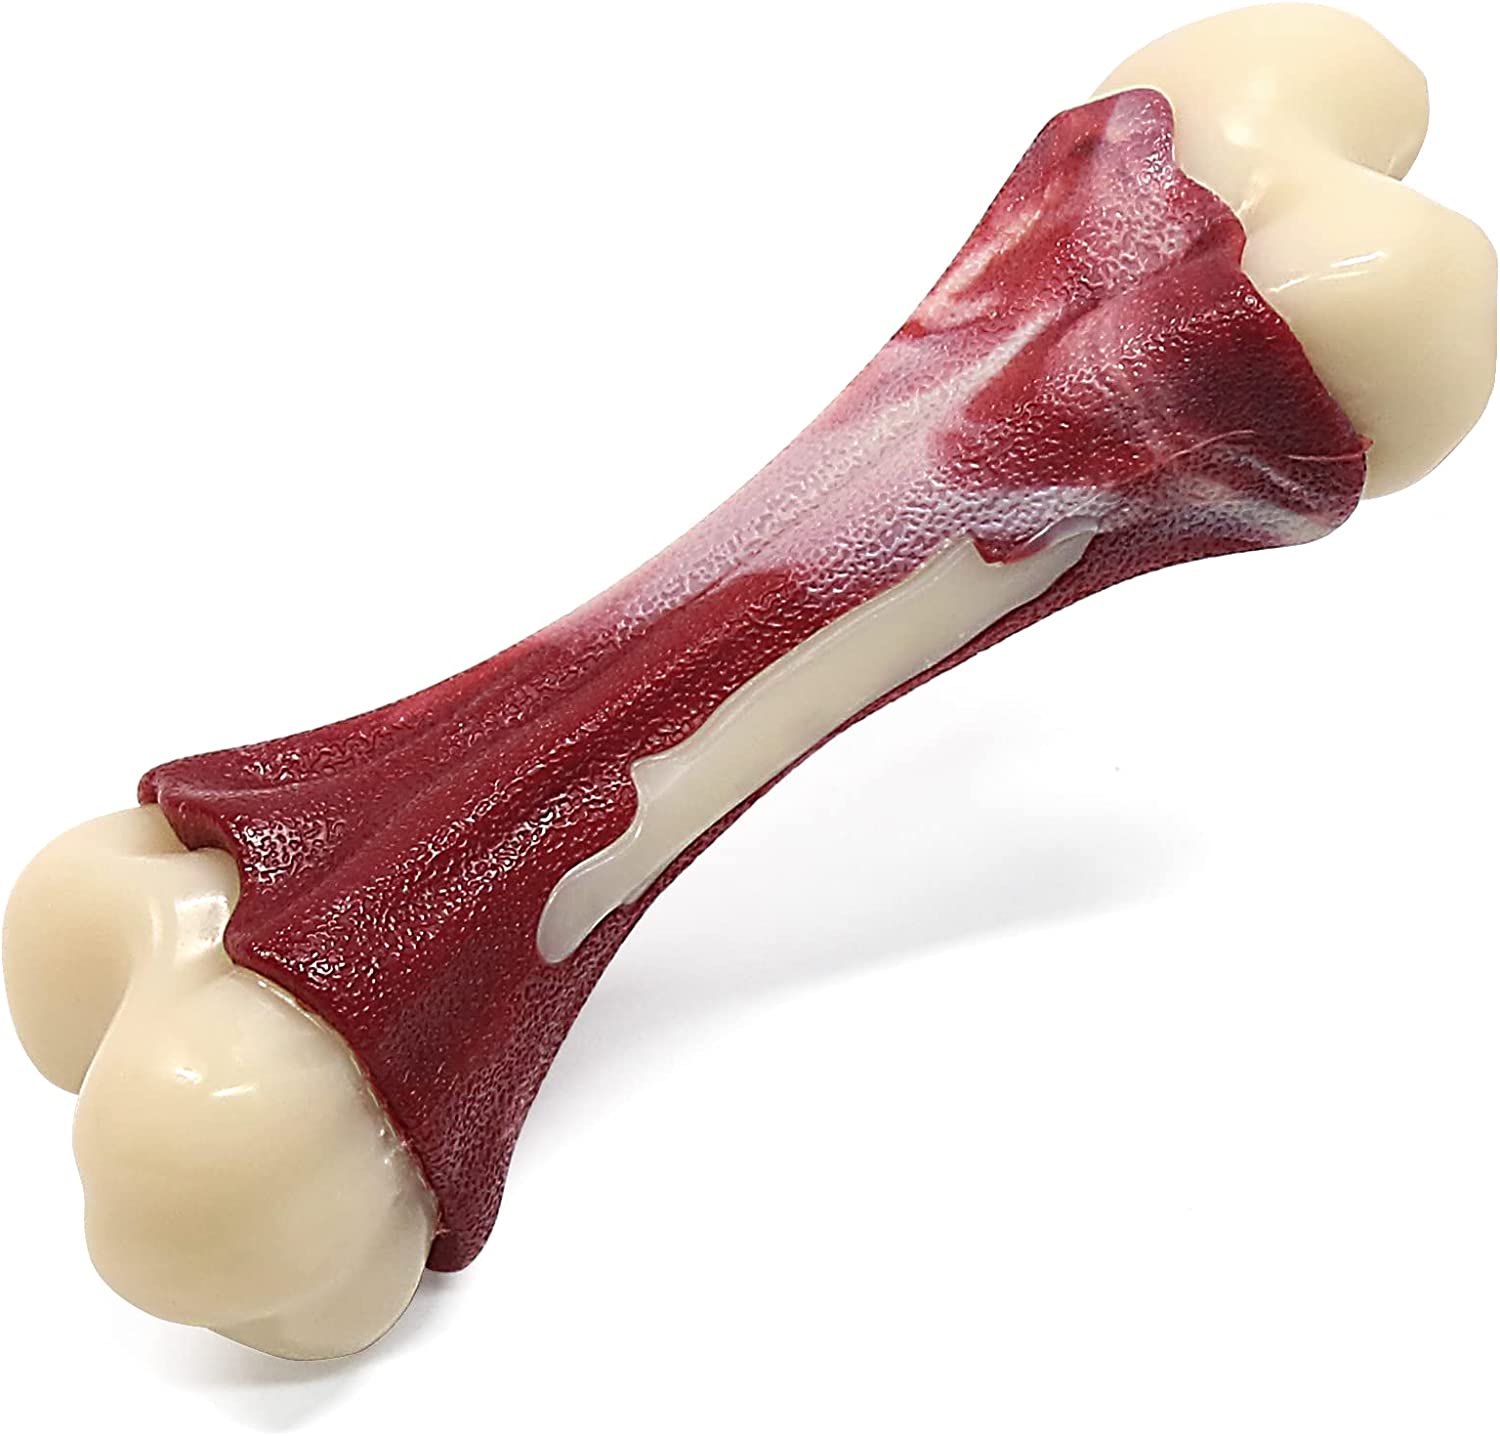 bone chew toy for dogs